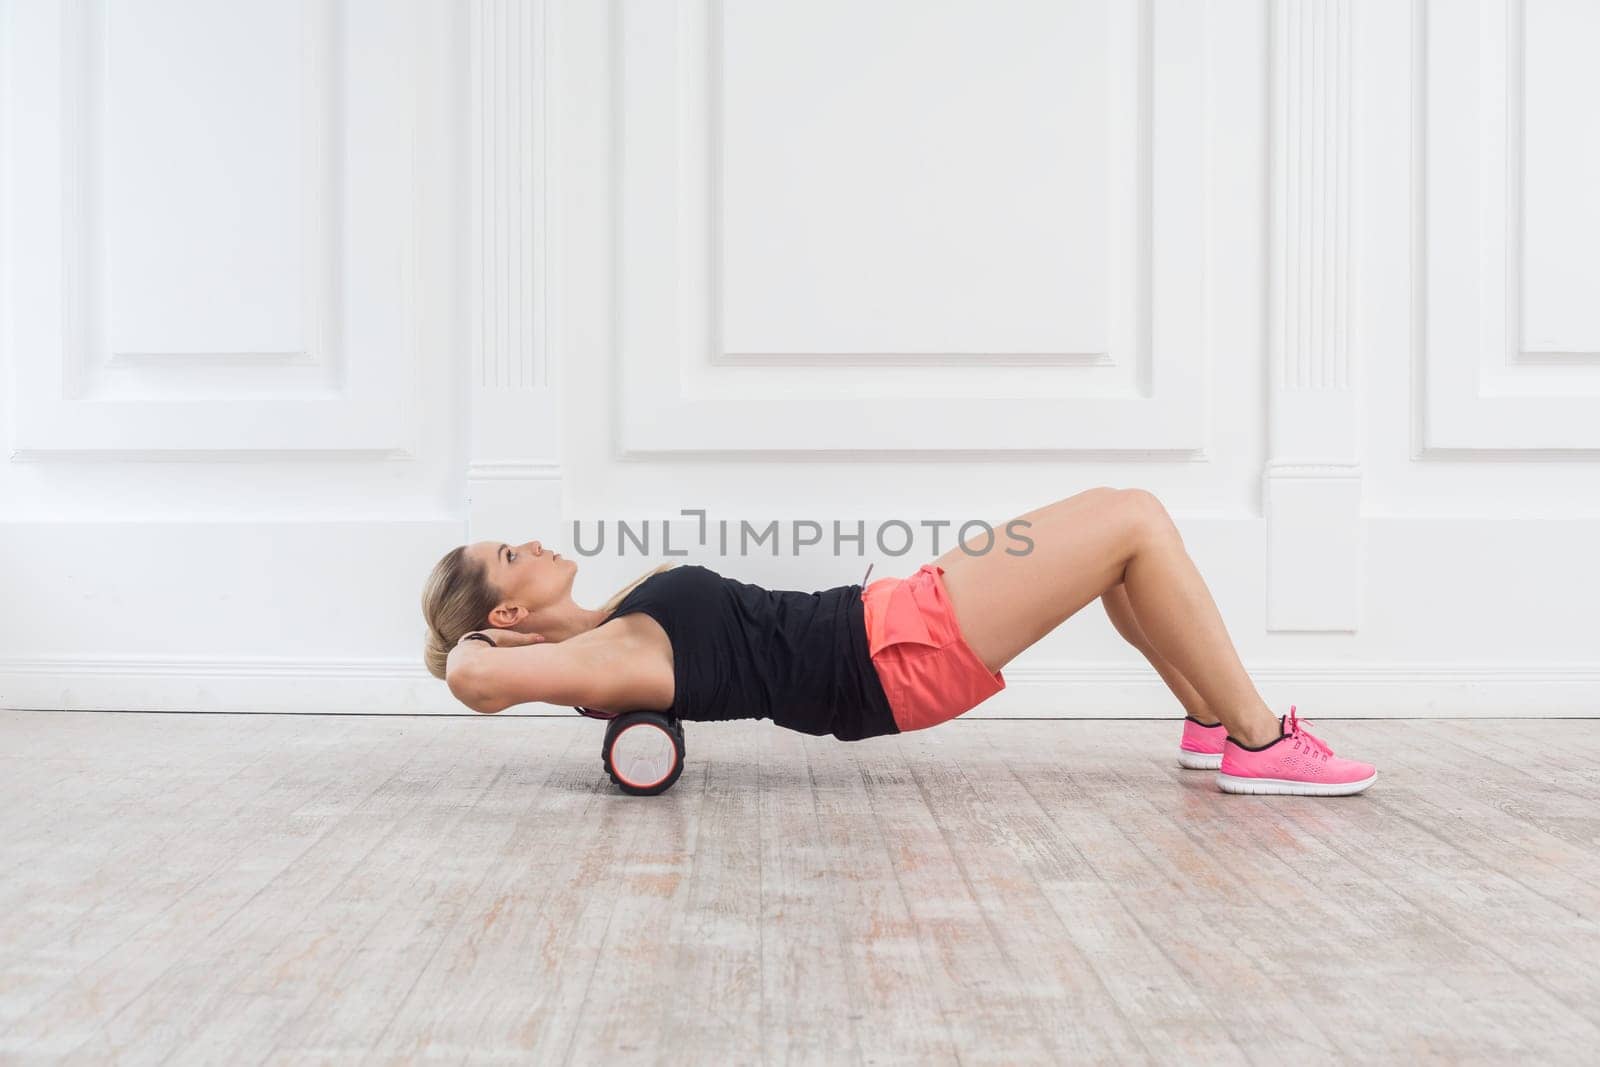 Side view portrait of slim athletic woman in pink shorts and black top using foam roller in gym to workout to remove the pain, stretching and massaging muscles. Indoor studio shot.